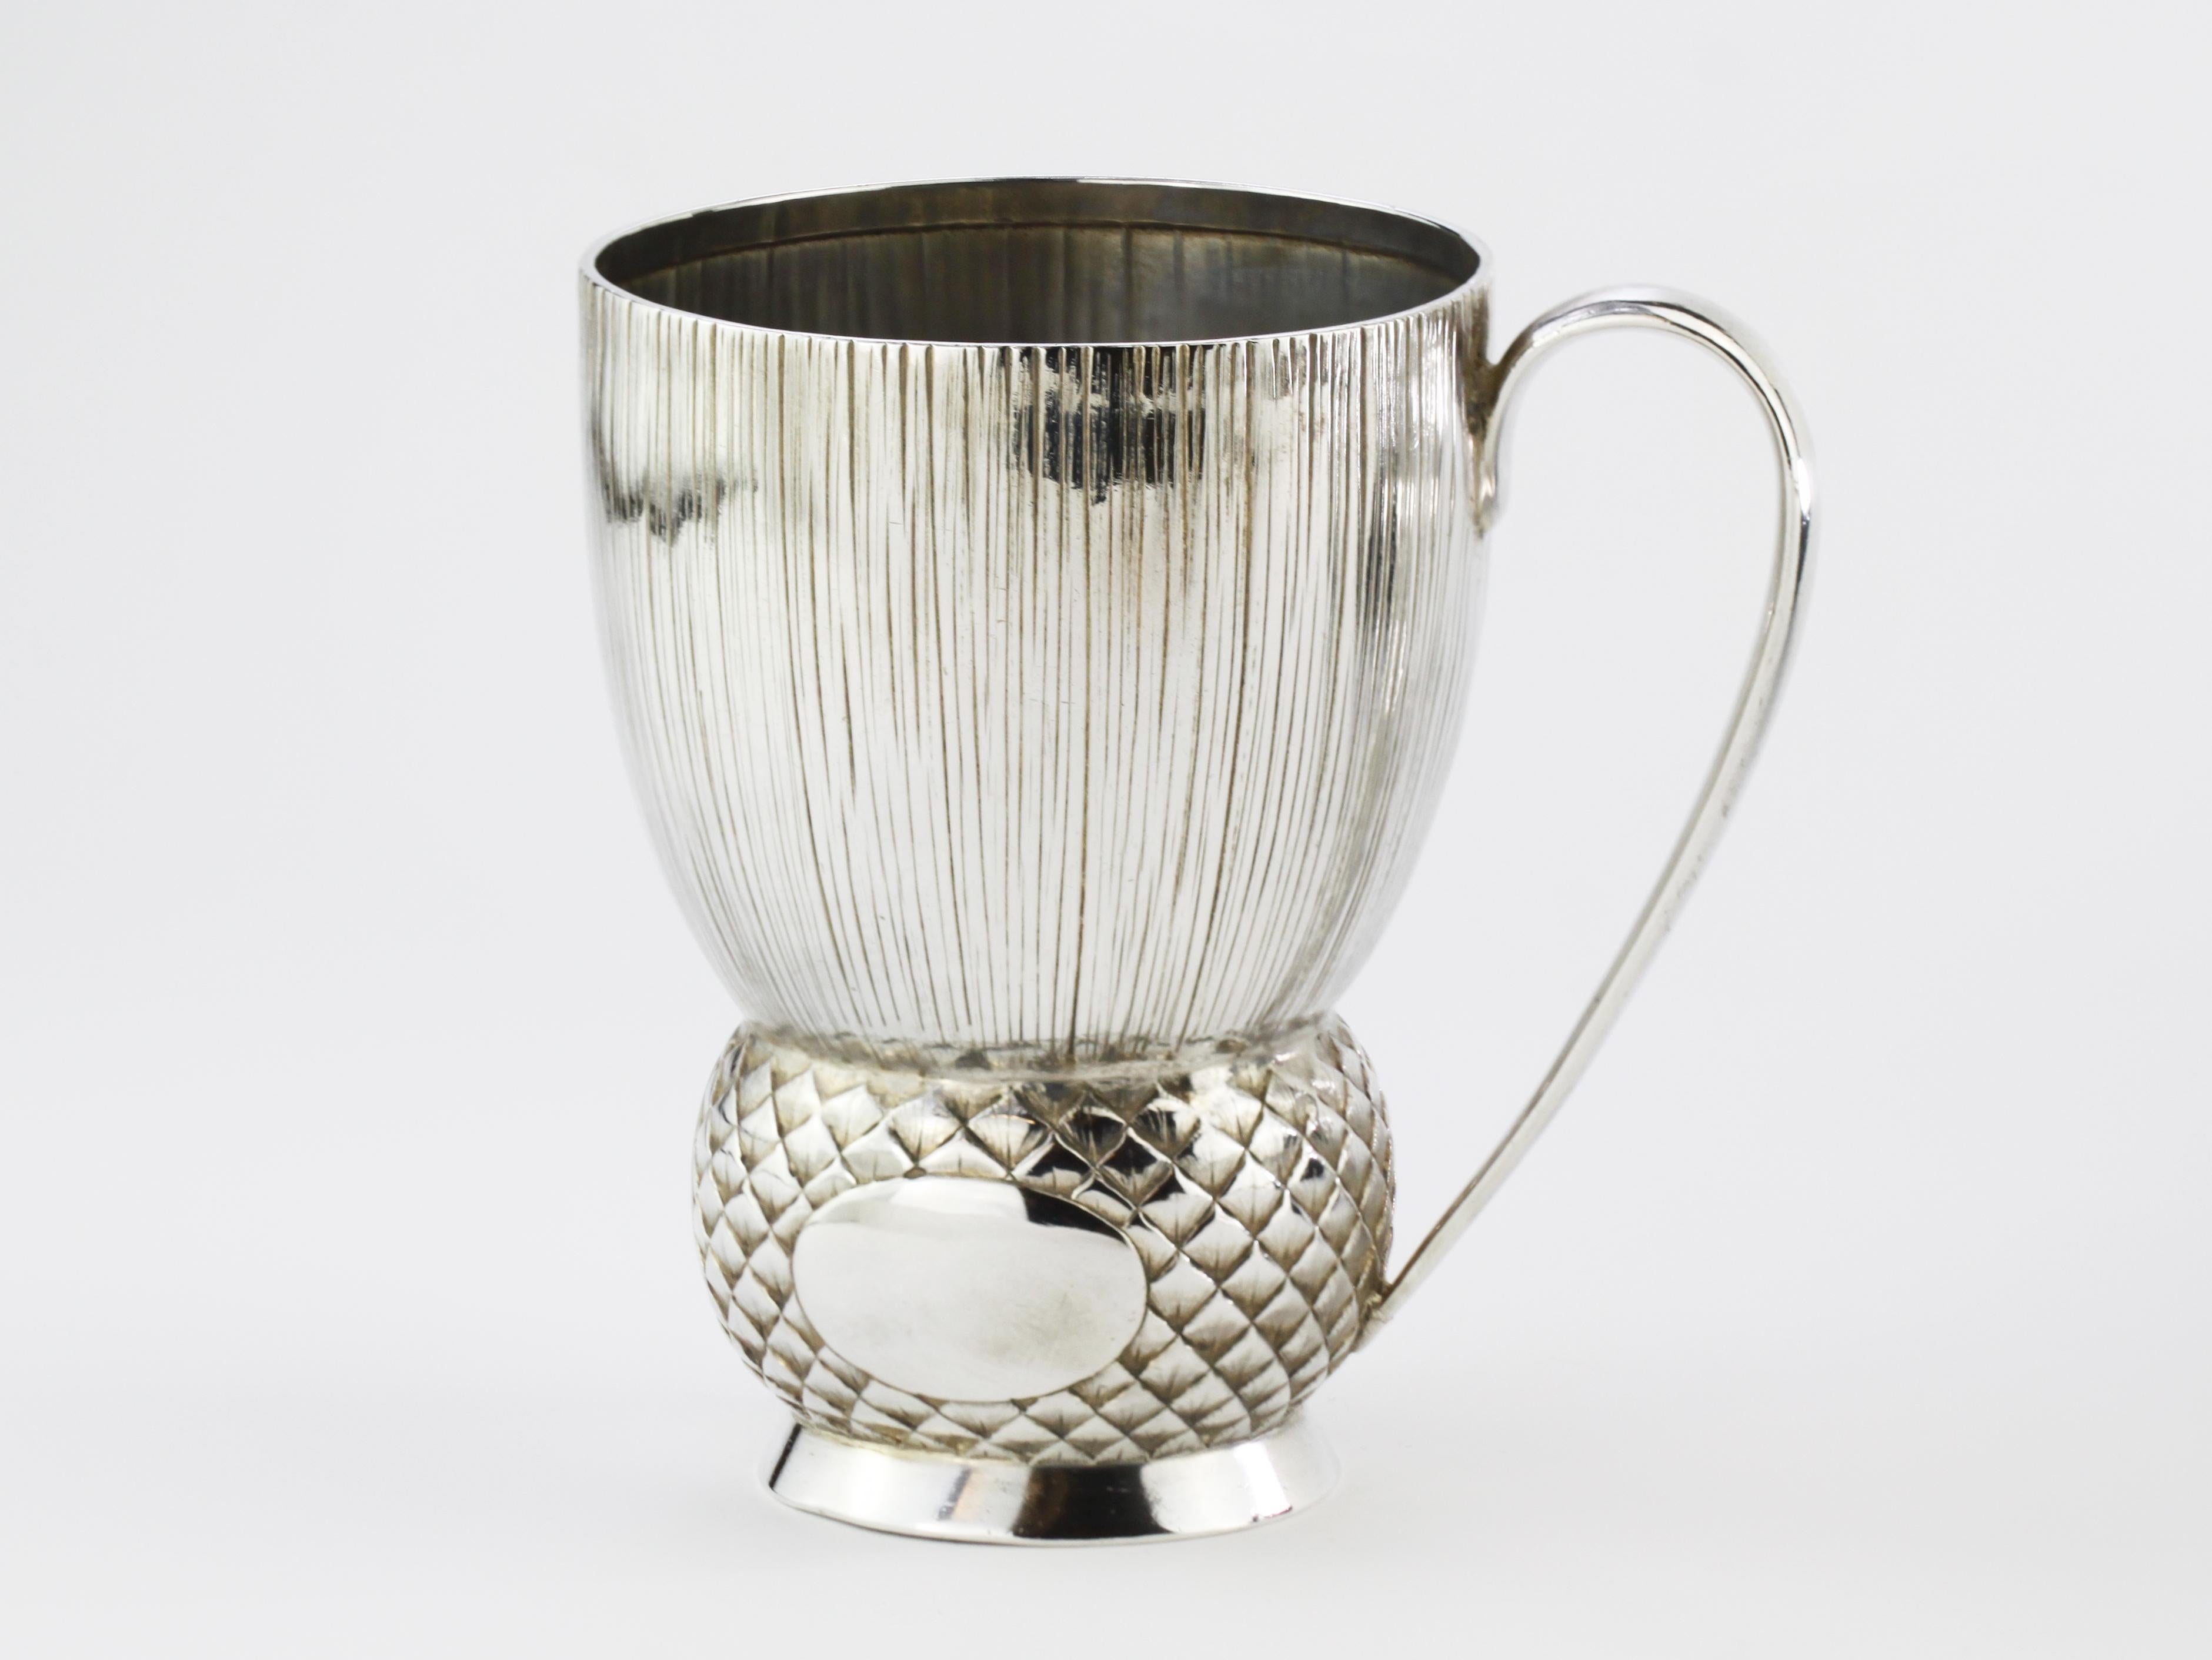 Antique Victorian sterling silver goblet
Maker: Goldsmiths & Silversmiths Co (William Gibson & John Lawrence Langman)
Made in Birmingham 1888
Fully hallmarked.

Dimensions:
Length 11.3 cm
Width 8.1 cm
Height 11.2 cm
Weight 224